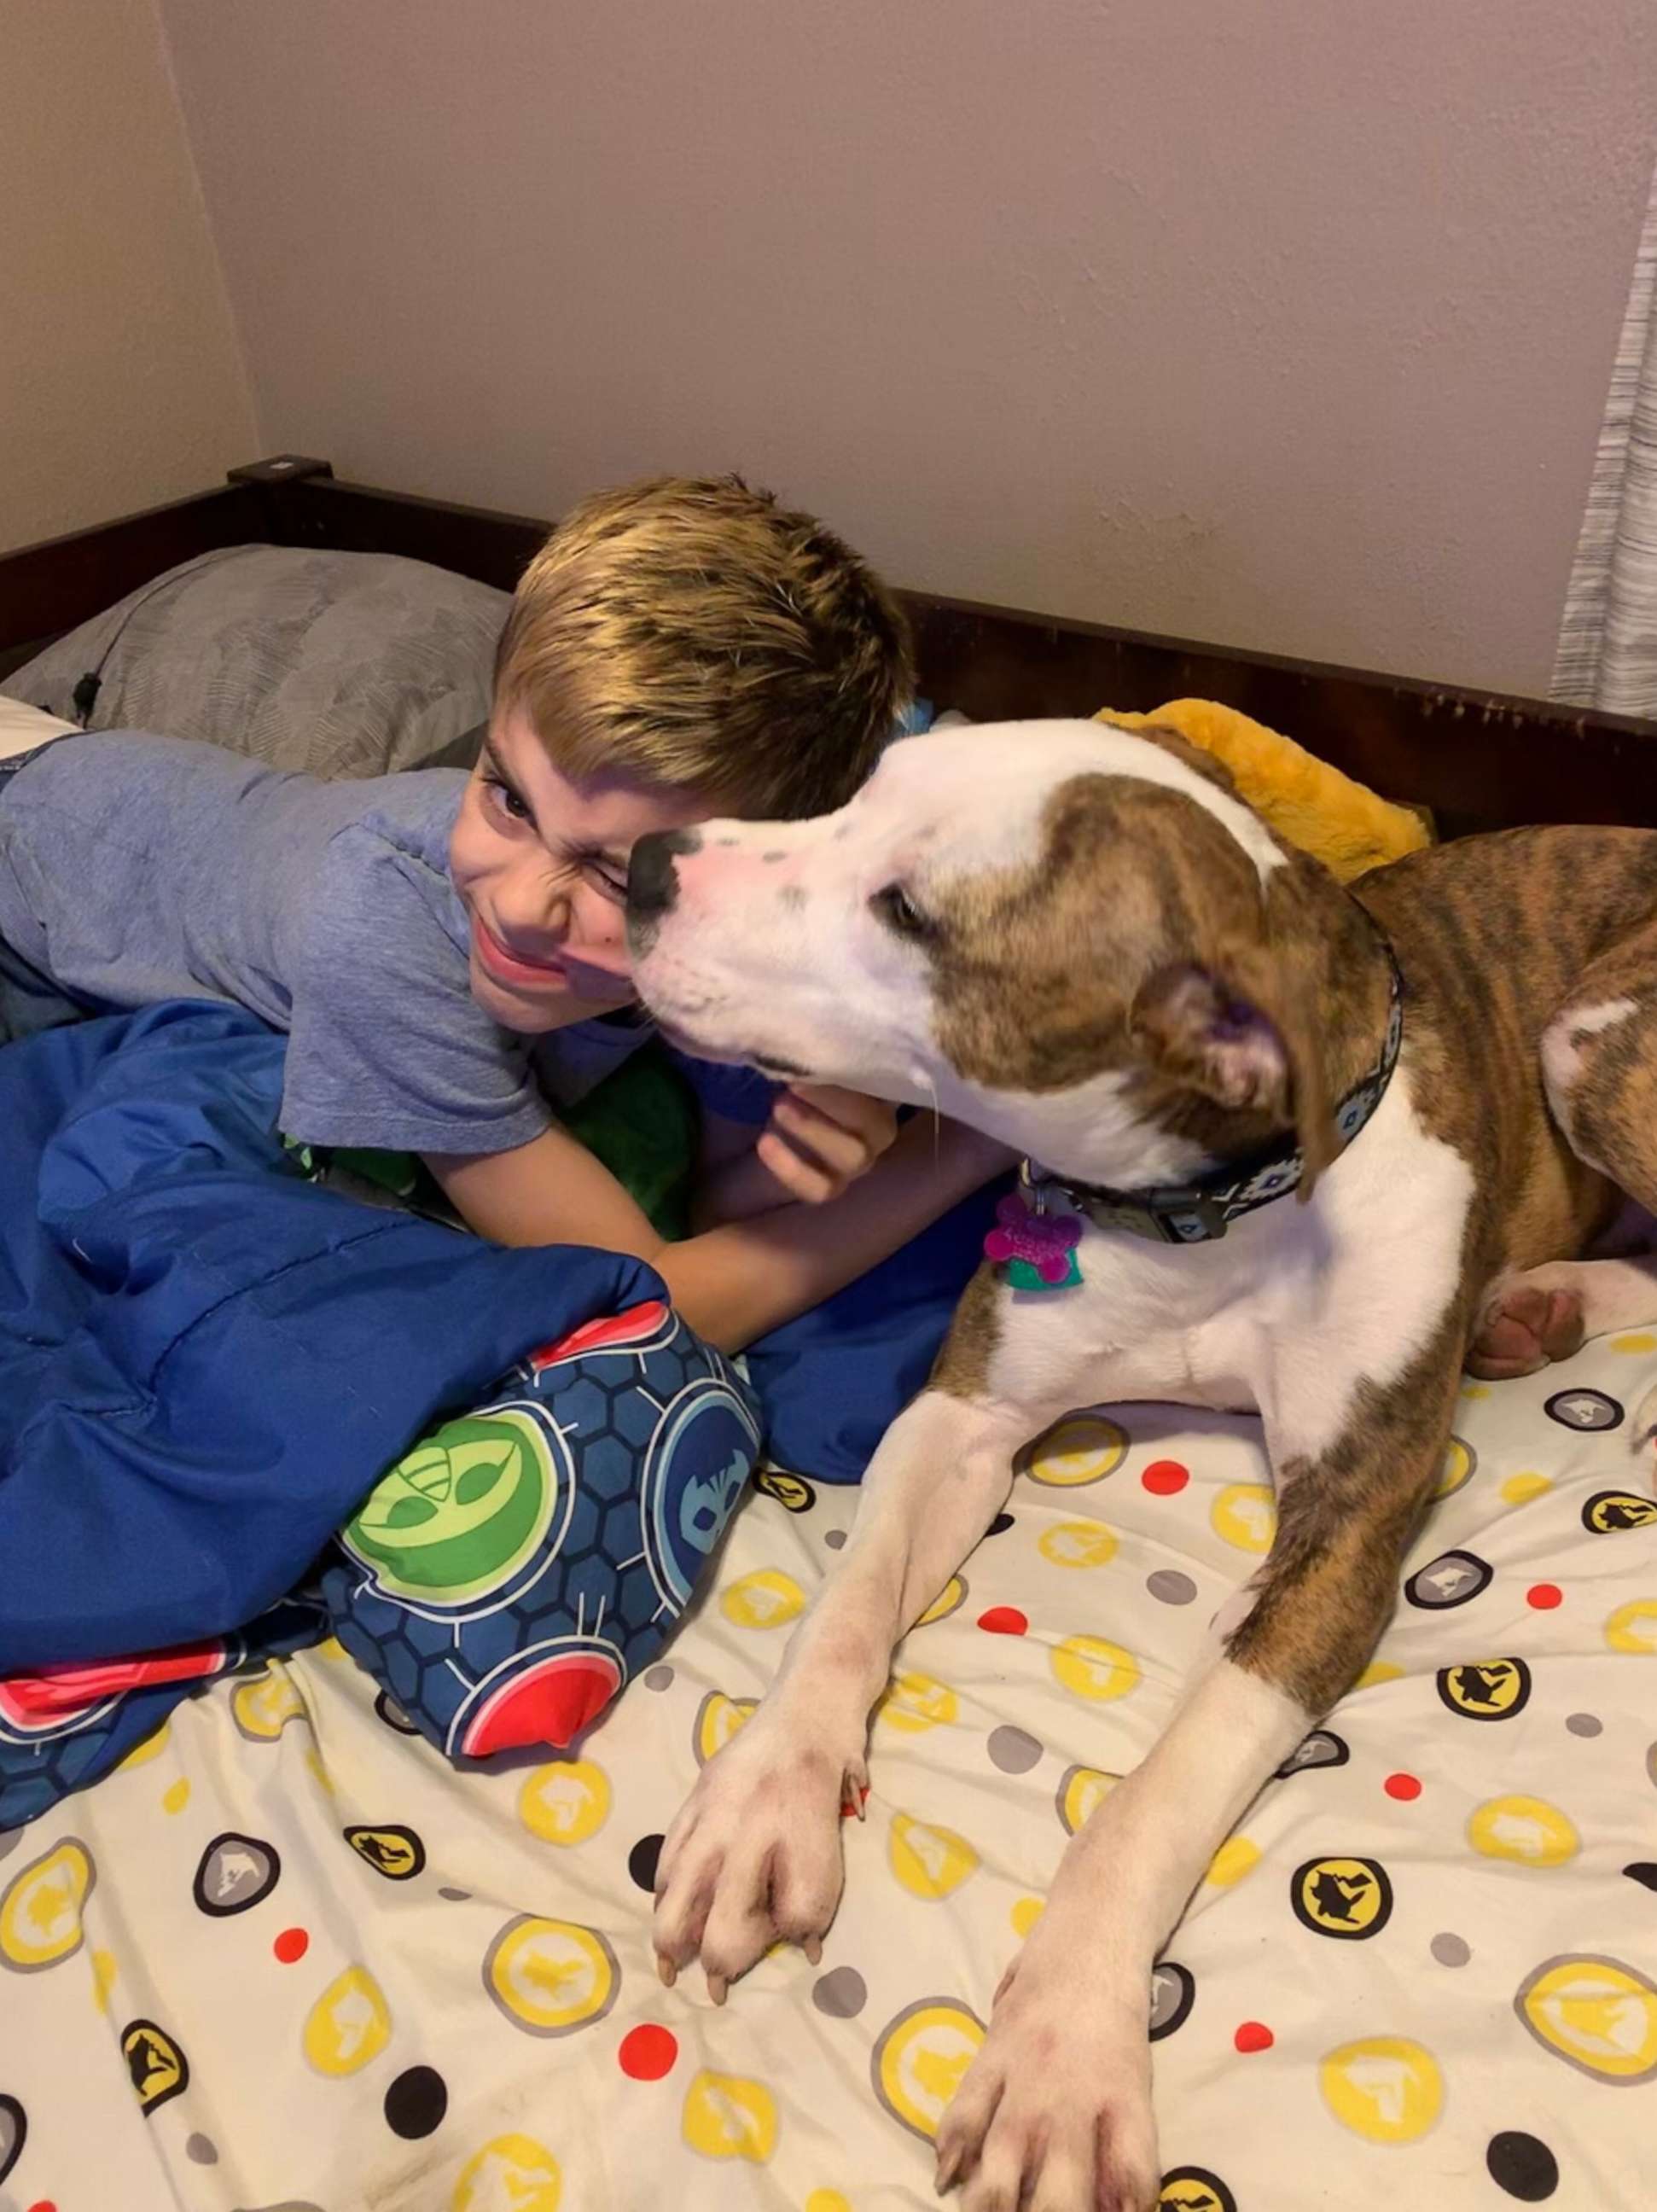 PHOTO: Gabe Banzhof, 10, was adopted by Thomas Banzhof before heading over to Lucas County Canine Care & Control in Toledo, Ohio, to bring home his dog, Cupid.